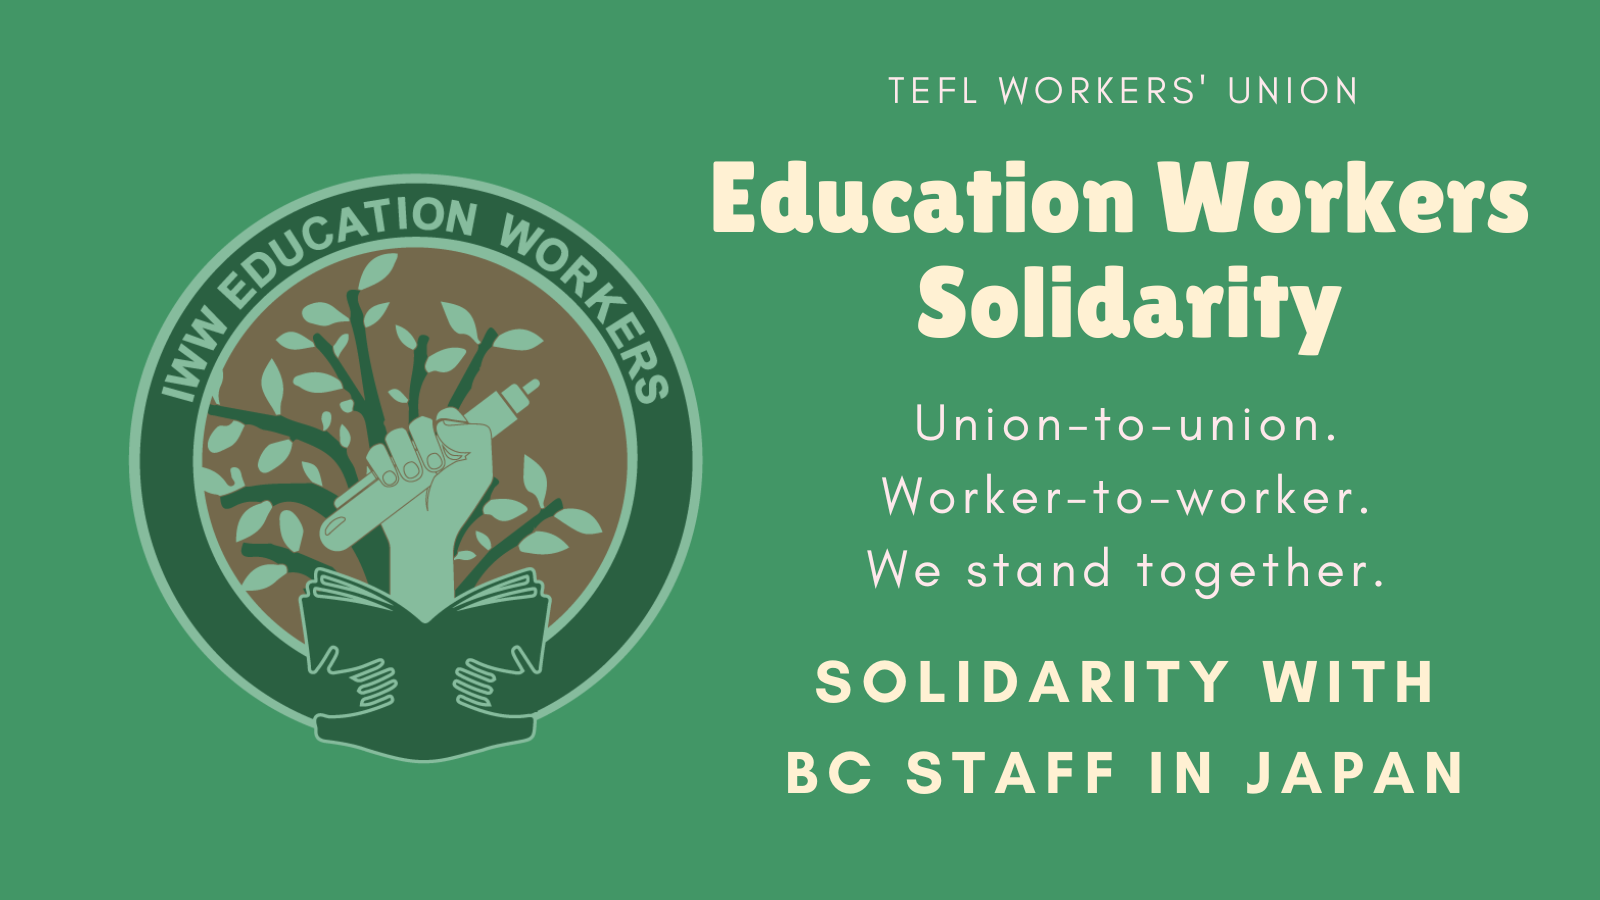 Image reads: Education Workers Solidarity. Union to union, worker to worker, we stand together